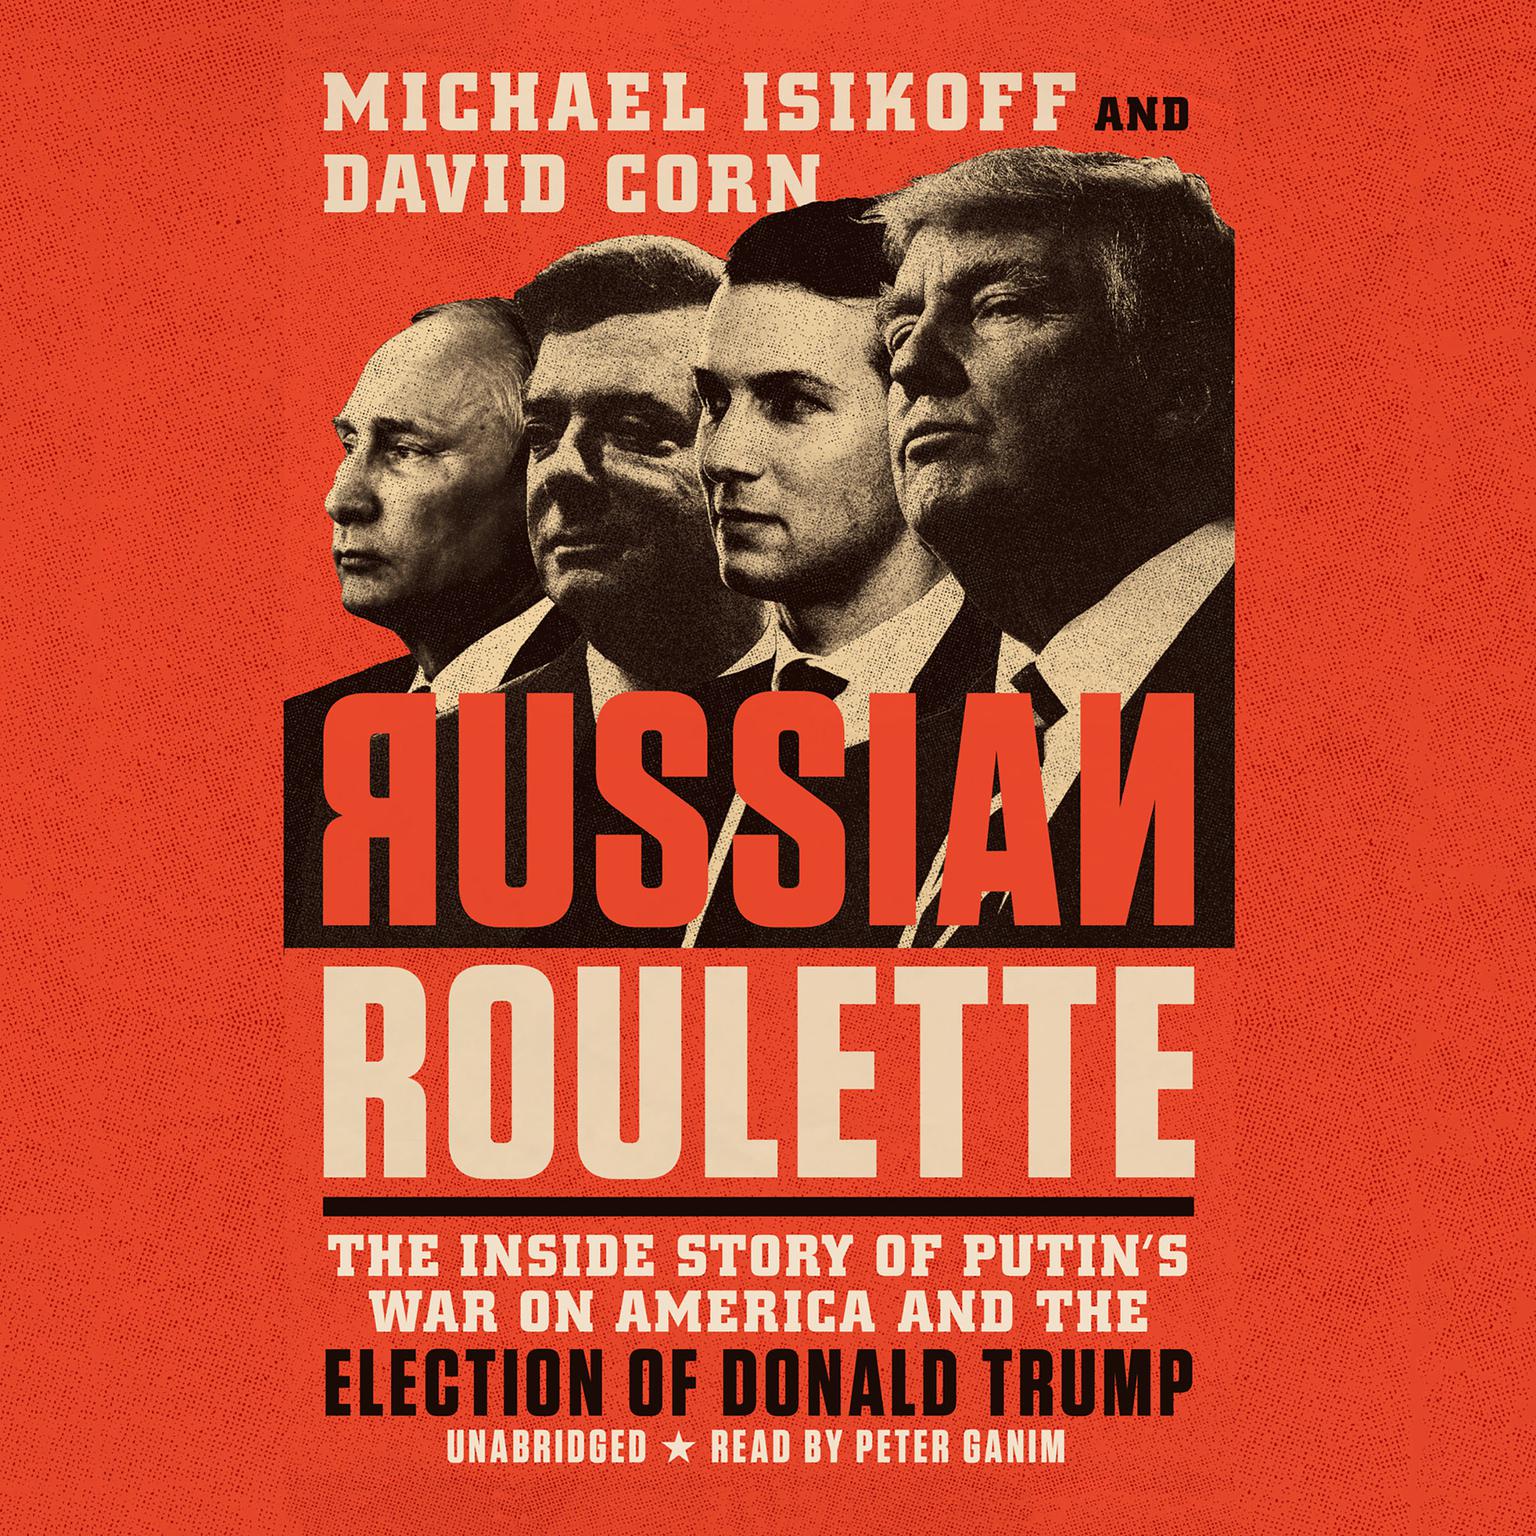 Russian Roulette: The Inside Story of Putins War on America and the Election of Donald Trump Audiobook, by David Corn